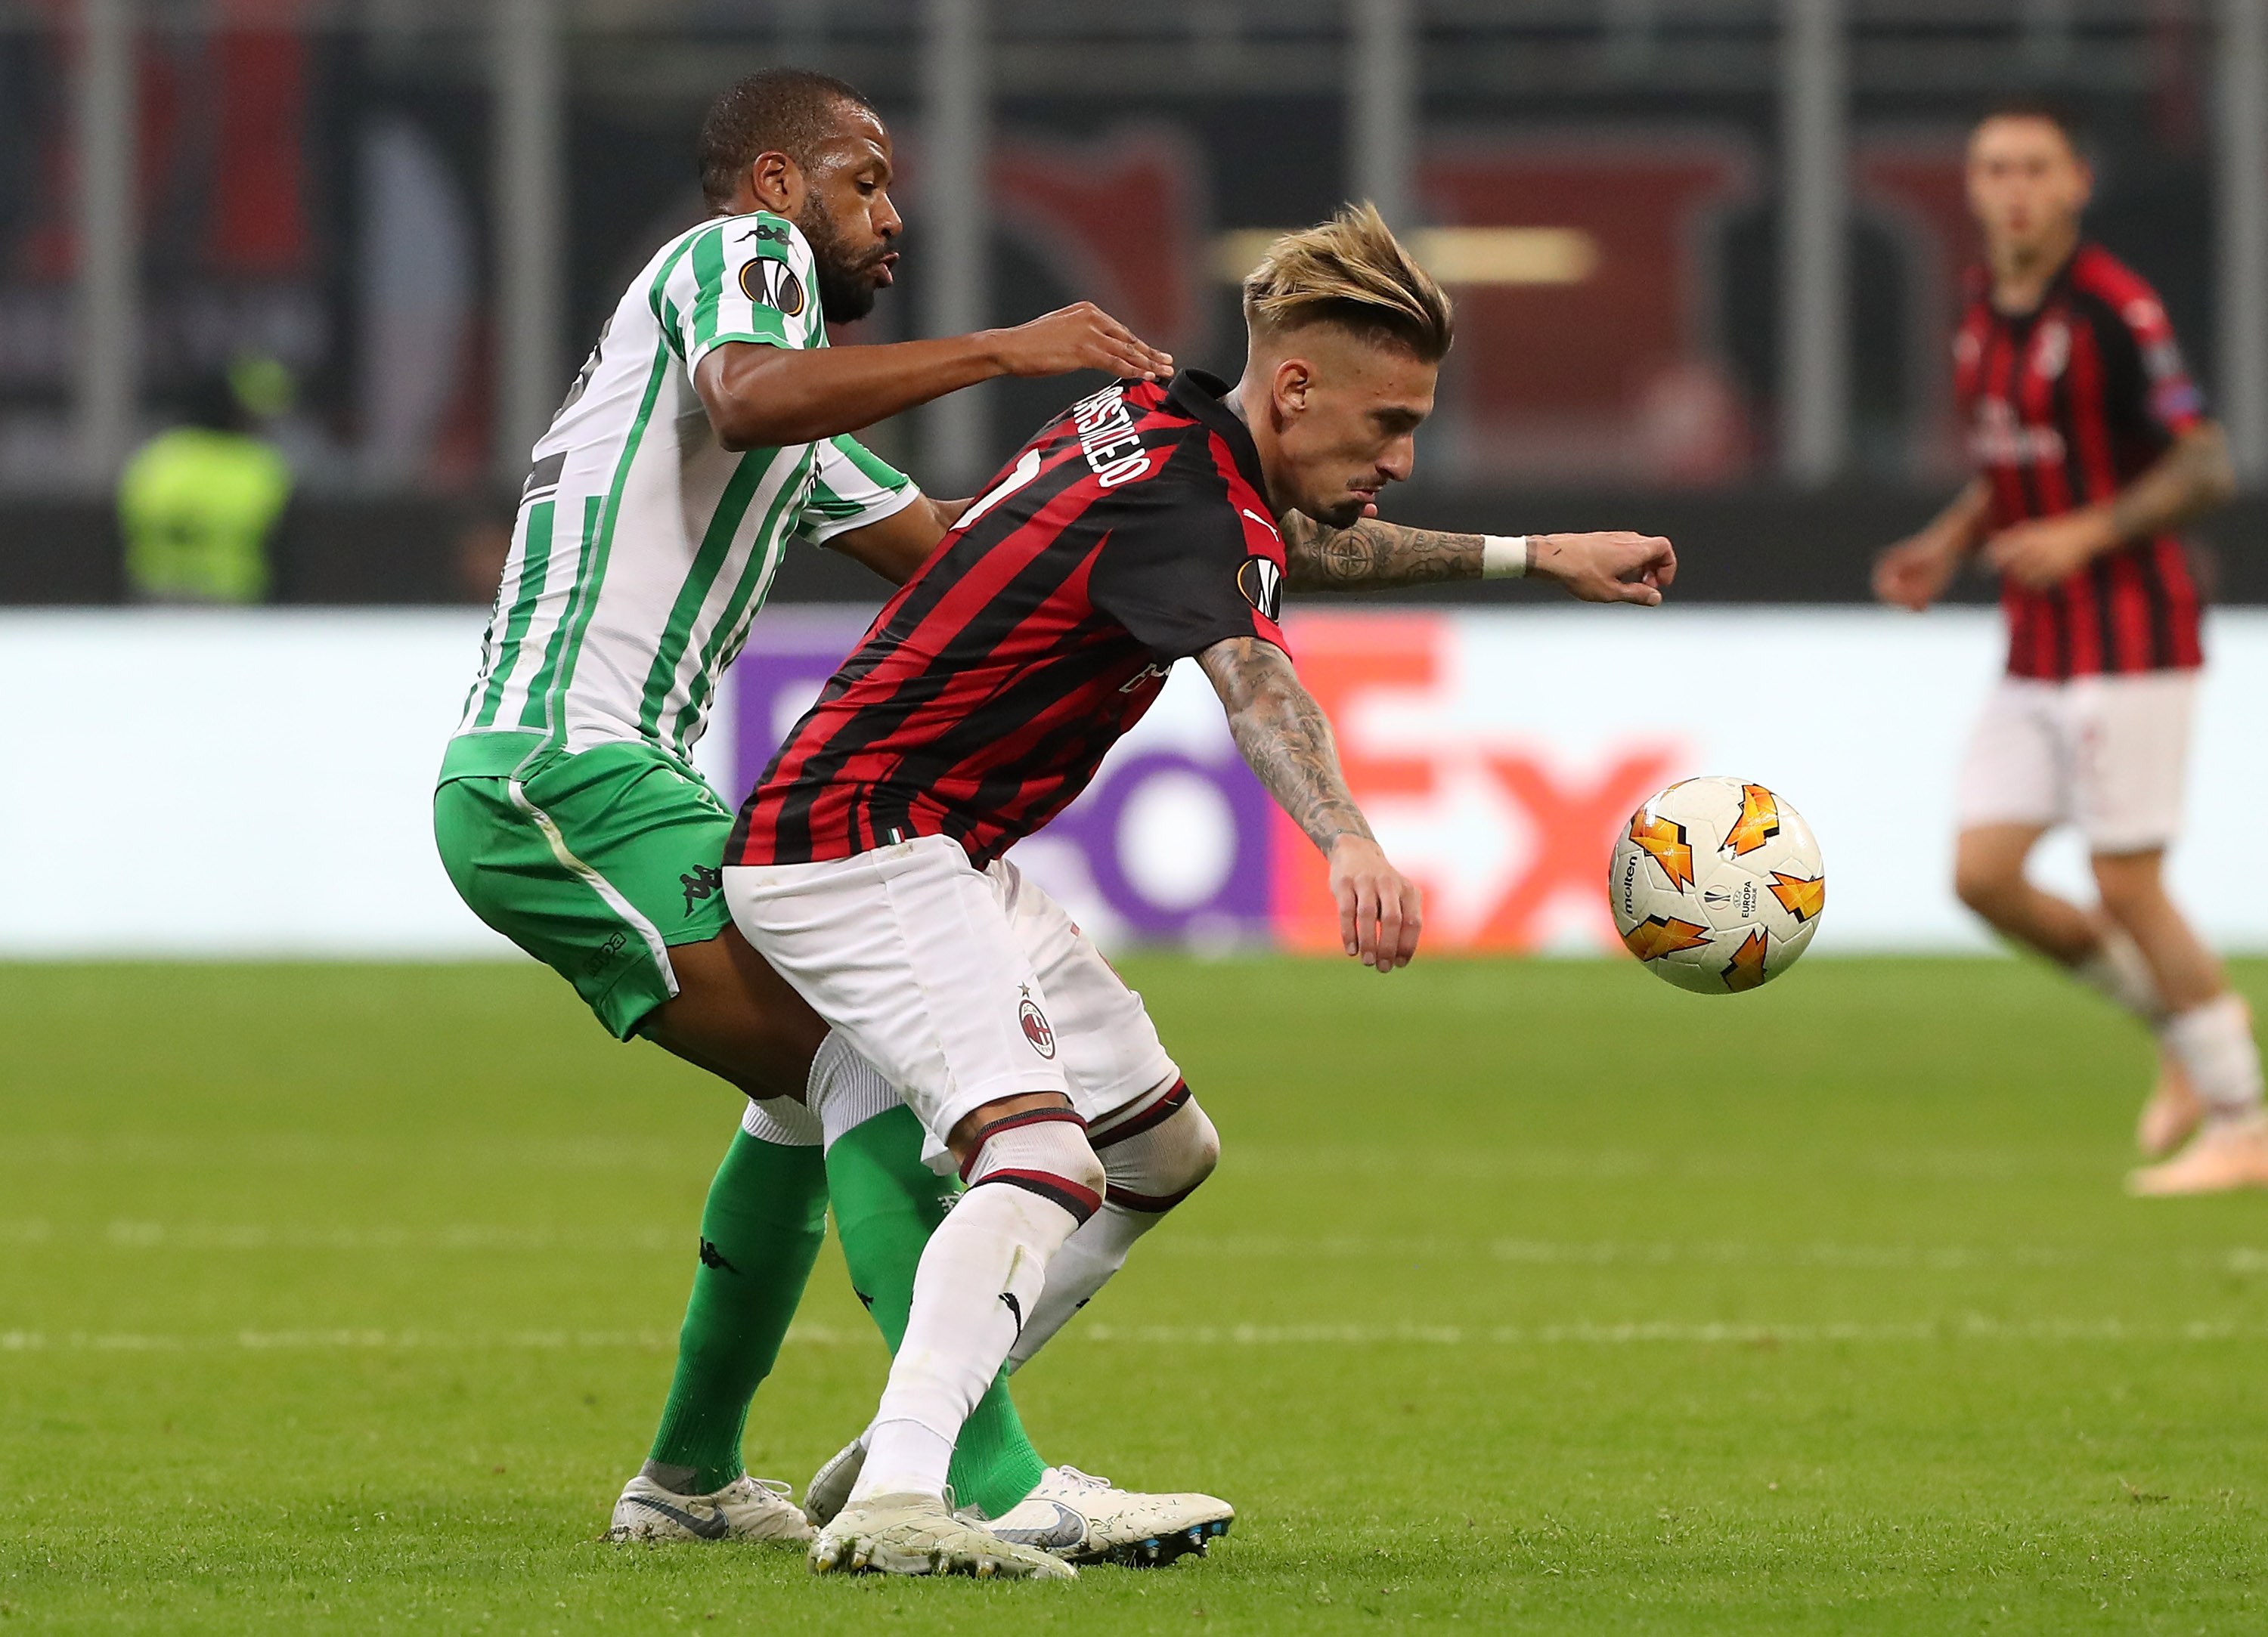 MILAN, ITALY - OCTOBER 25: Samuel Castillejo (R) of AC Milan is challenged by Pau Lopez (L) of Real Betis during the UEFA Europa League Group F match between AC Milan and Real Betis at Stadio Giuseppe Meazza on October 25, 2018 in Milan, Italy. (Photo by Marco Luzzani/Getty Images)